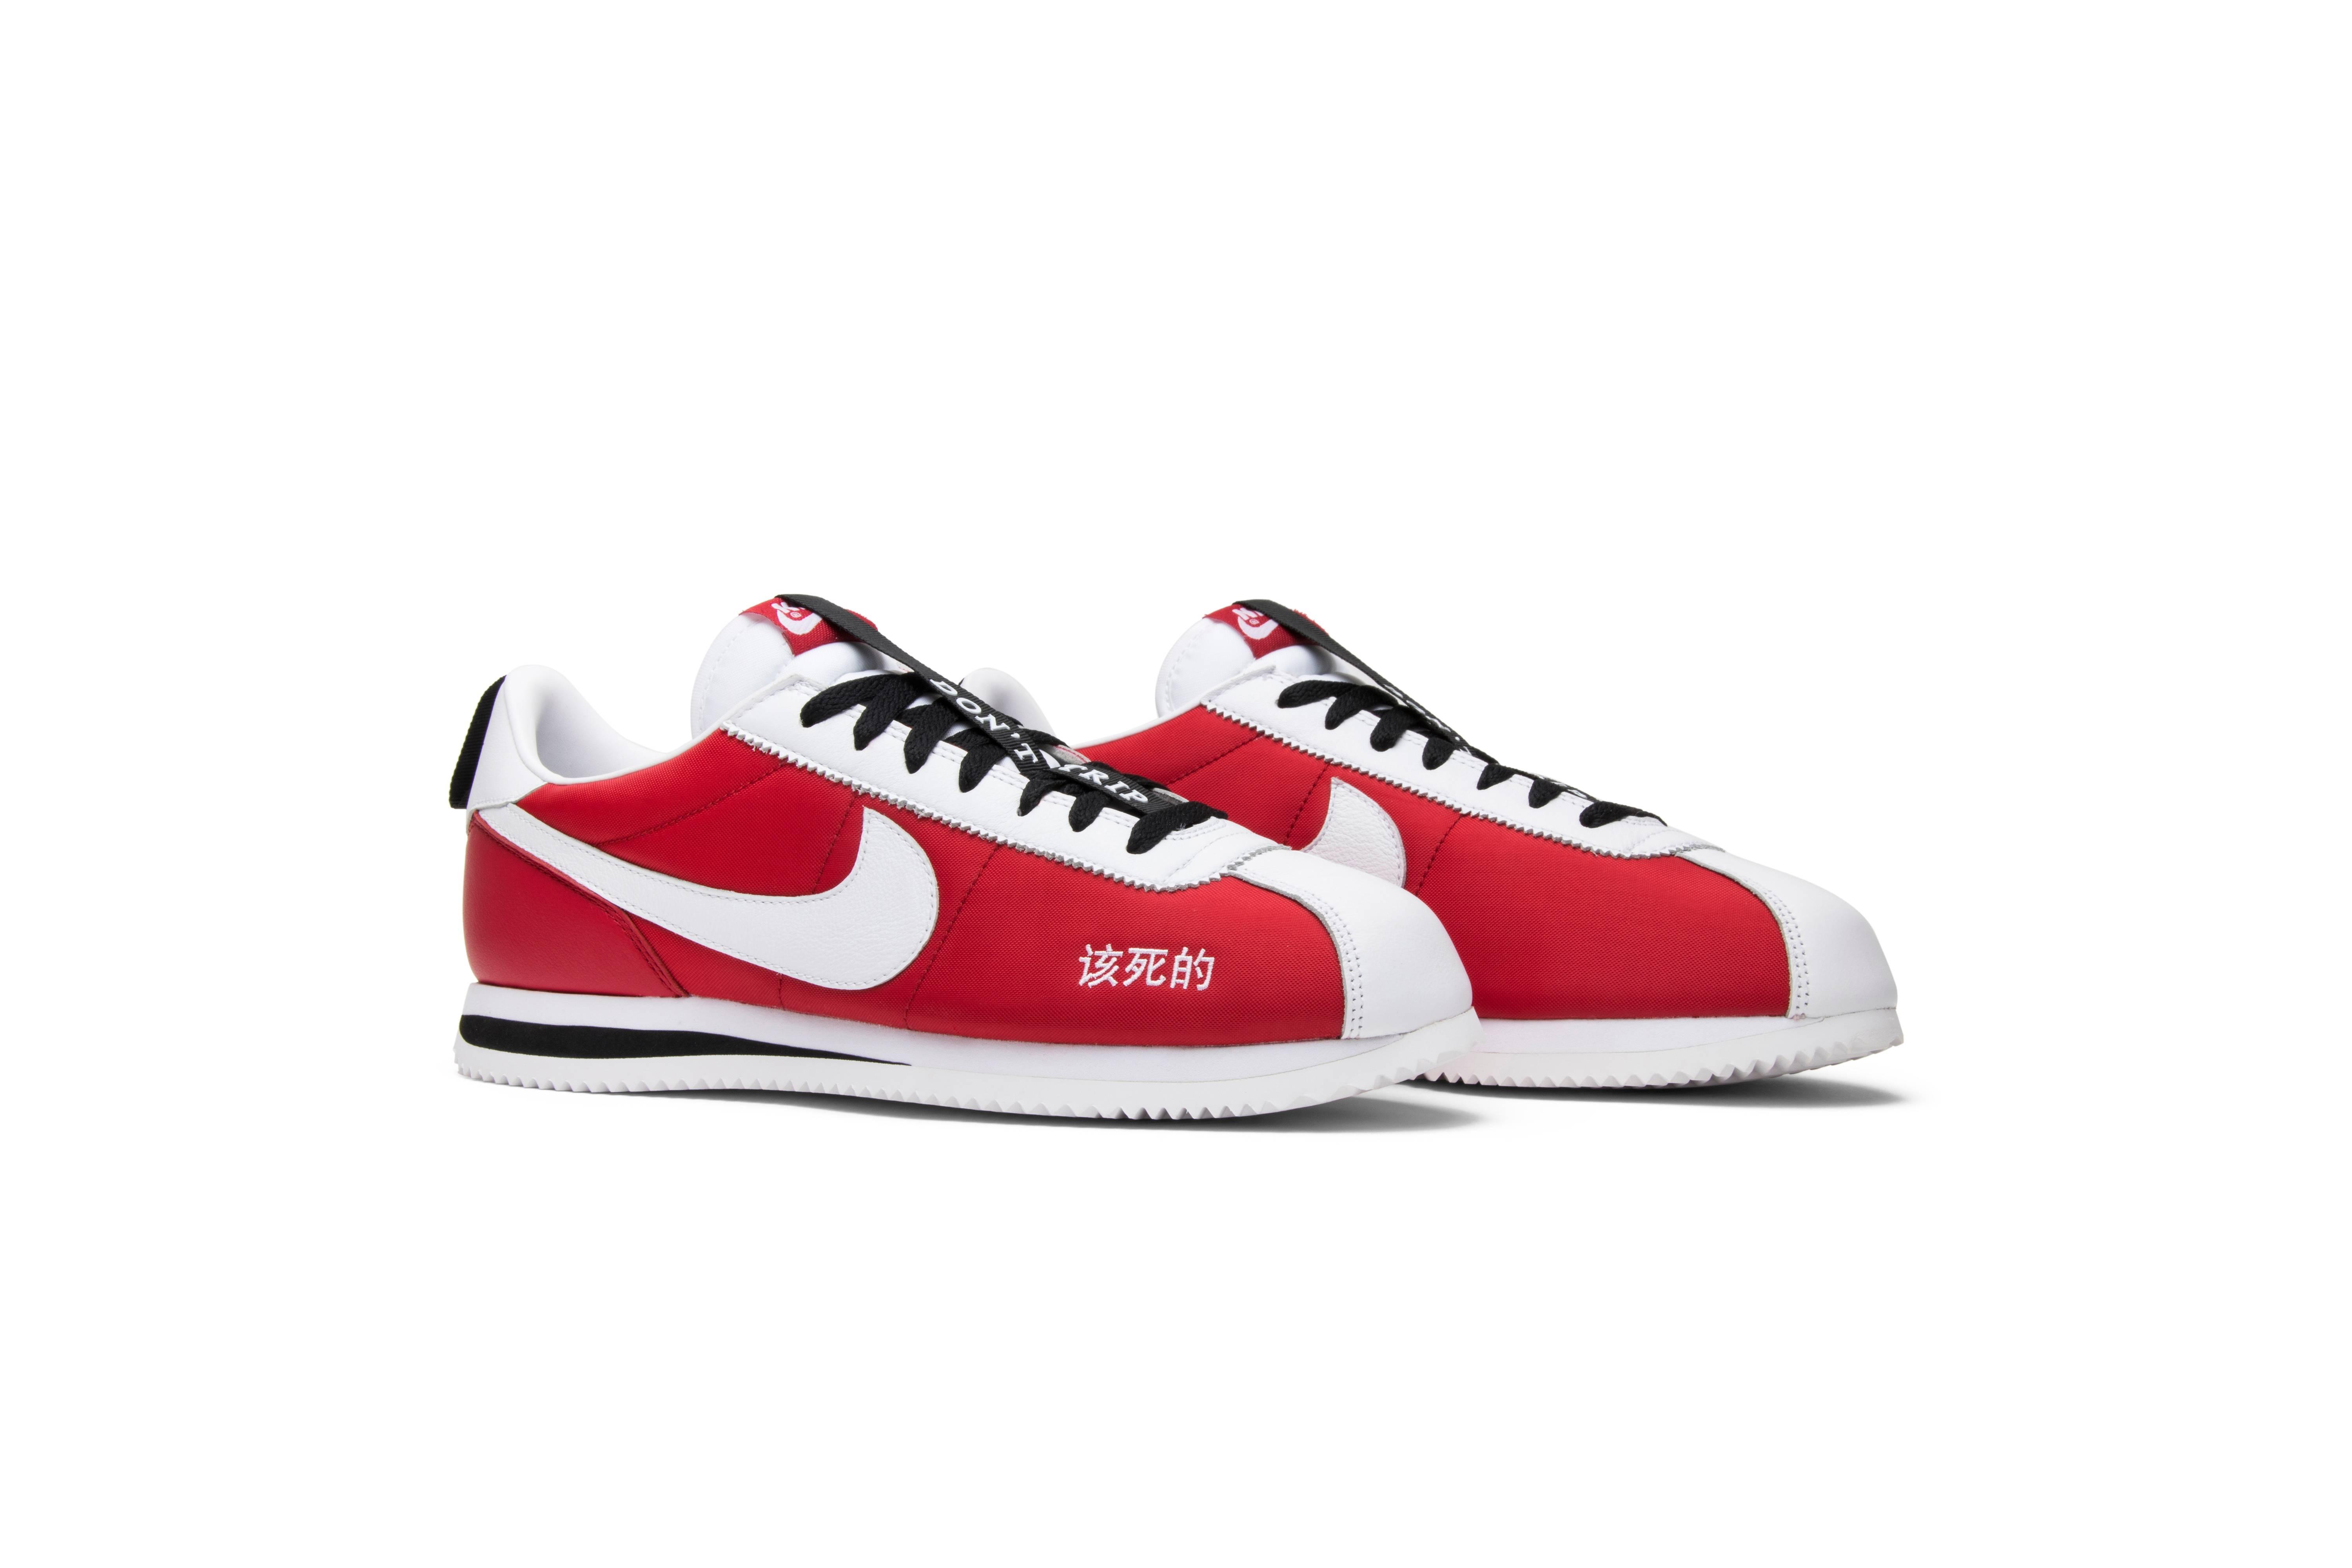 cortez kenny 2 for sale